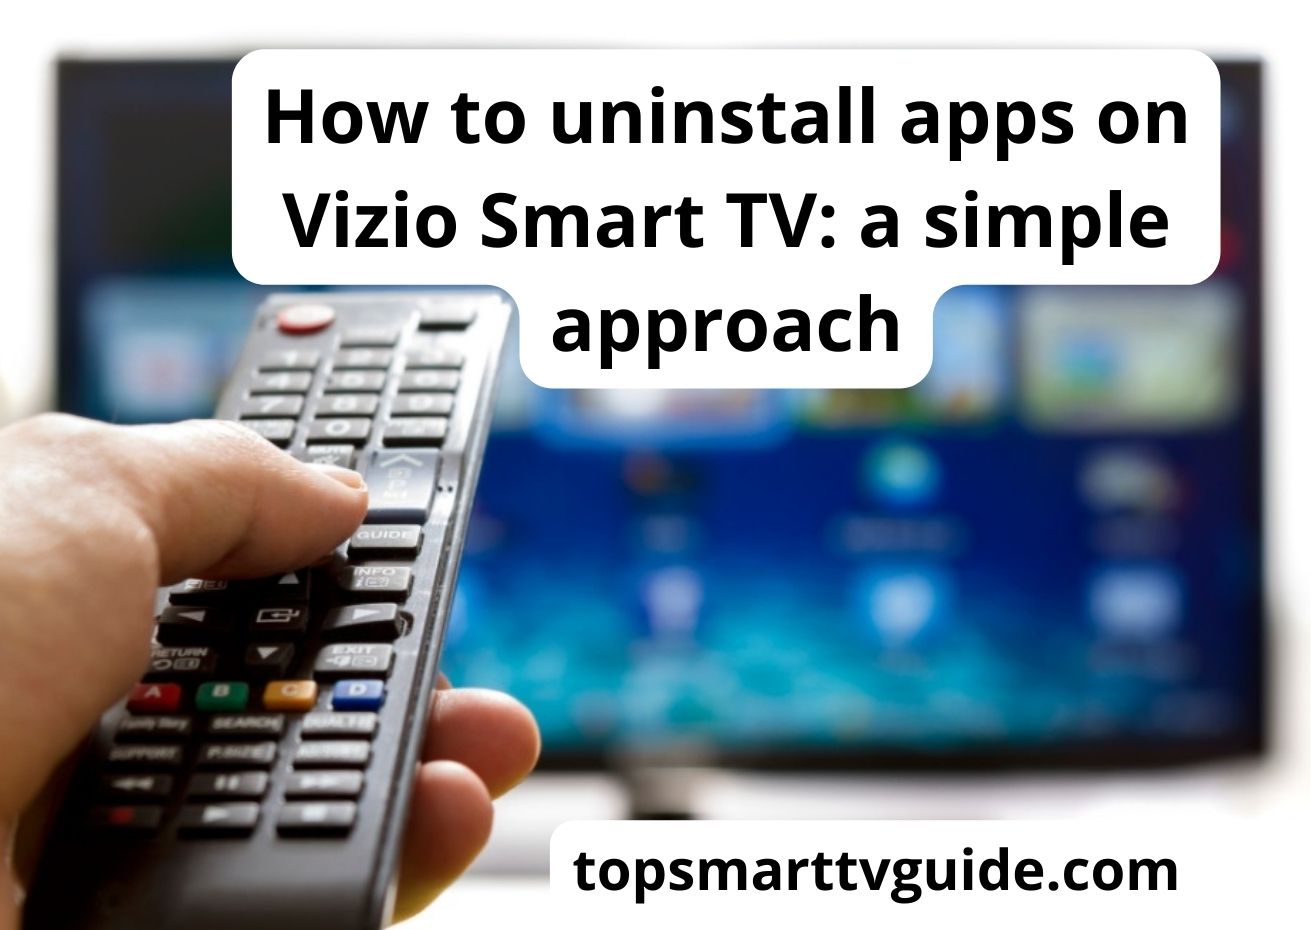 How to uninstall apps on Vizio Smart TV? Read the best guide now!